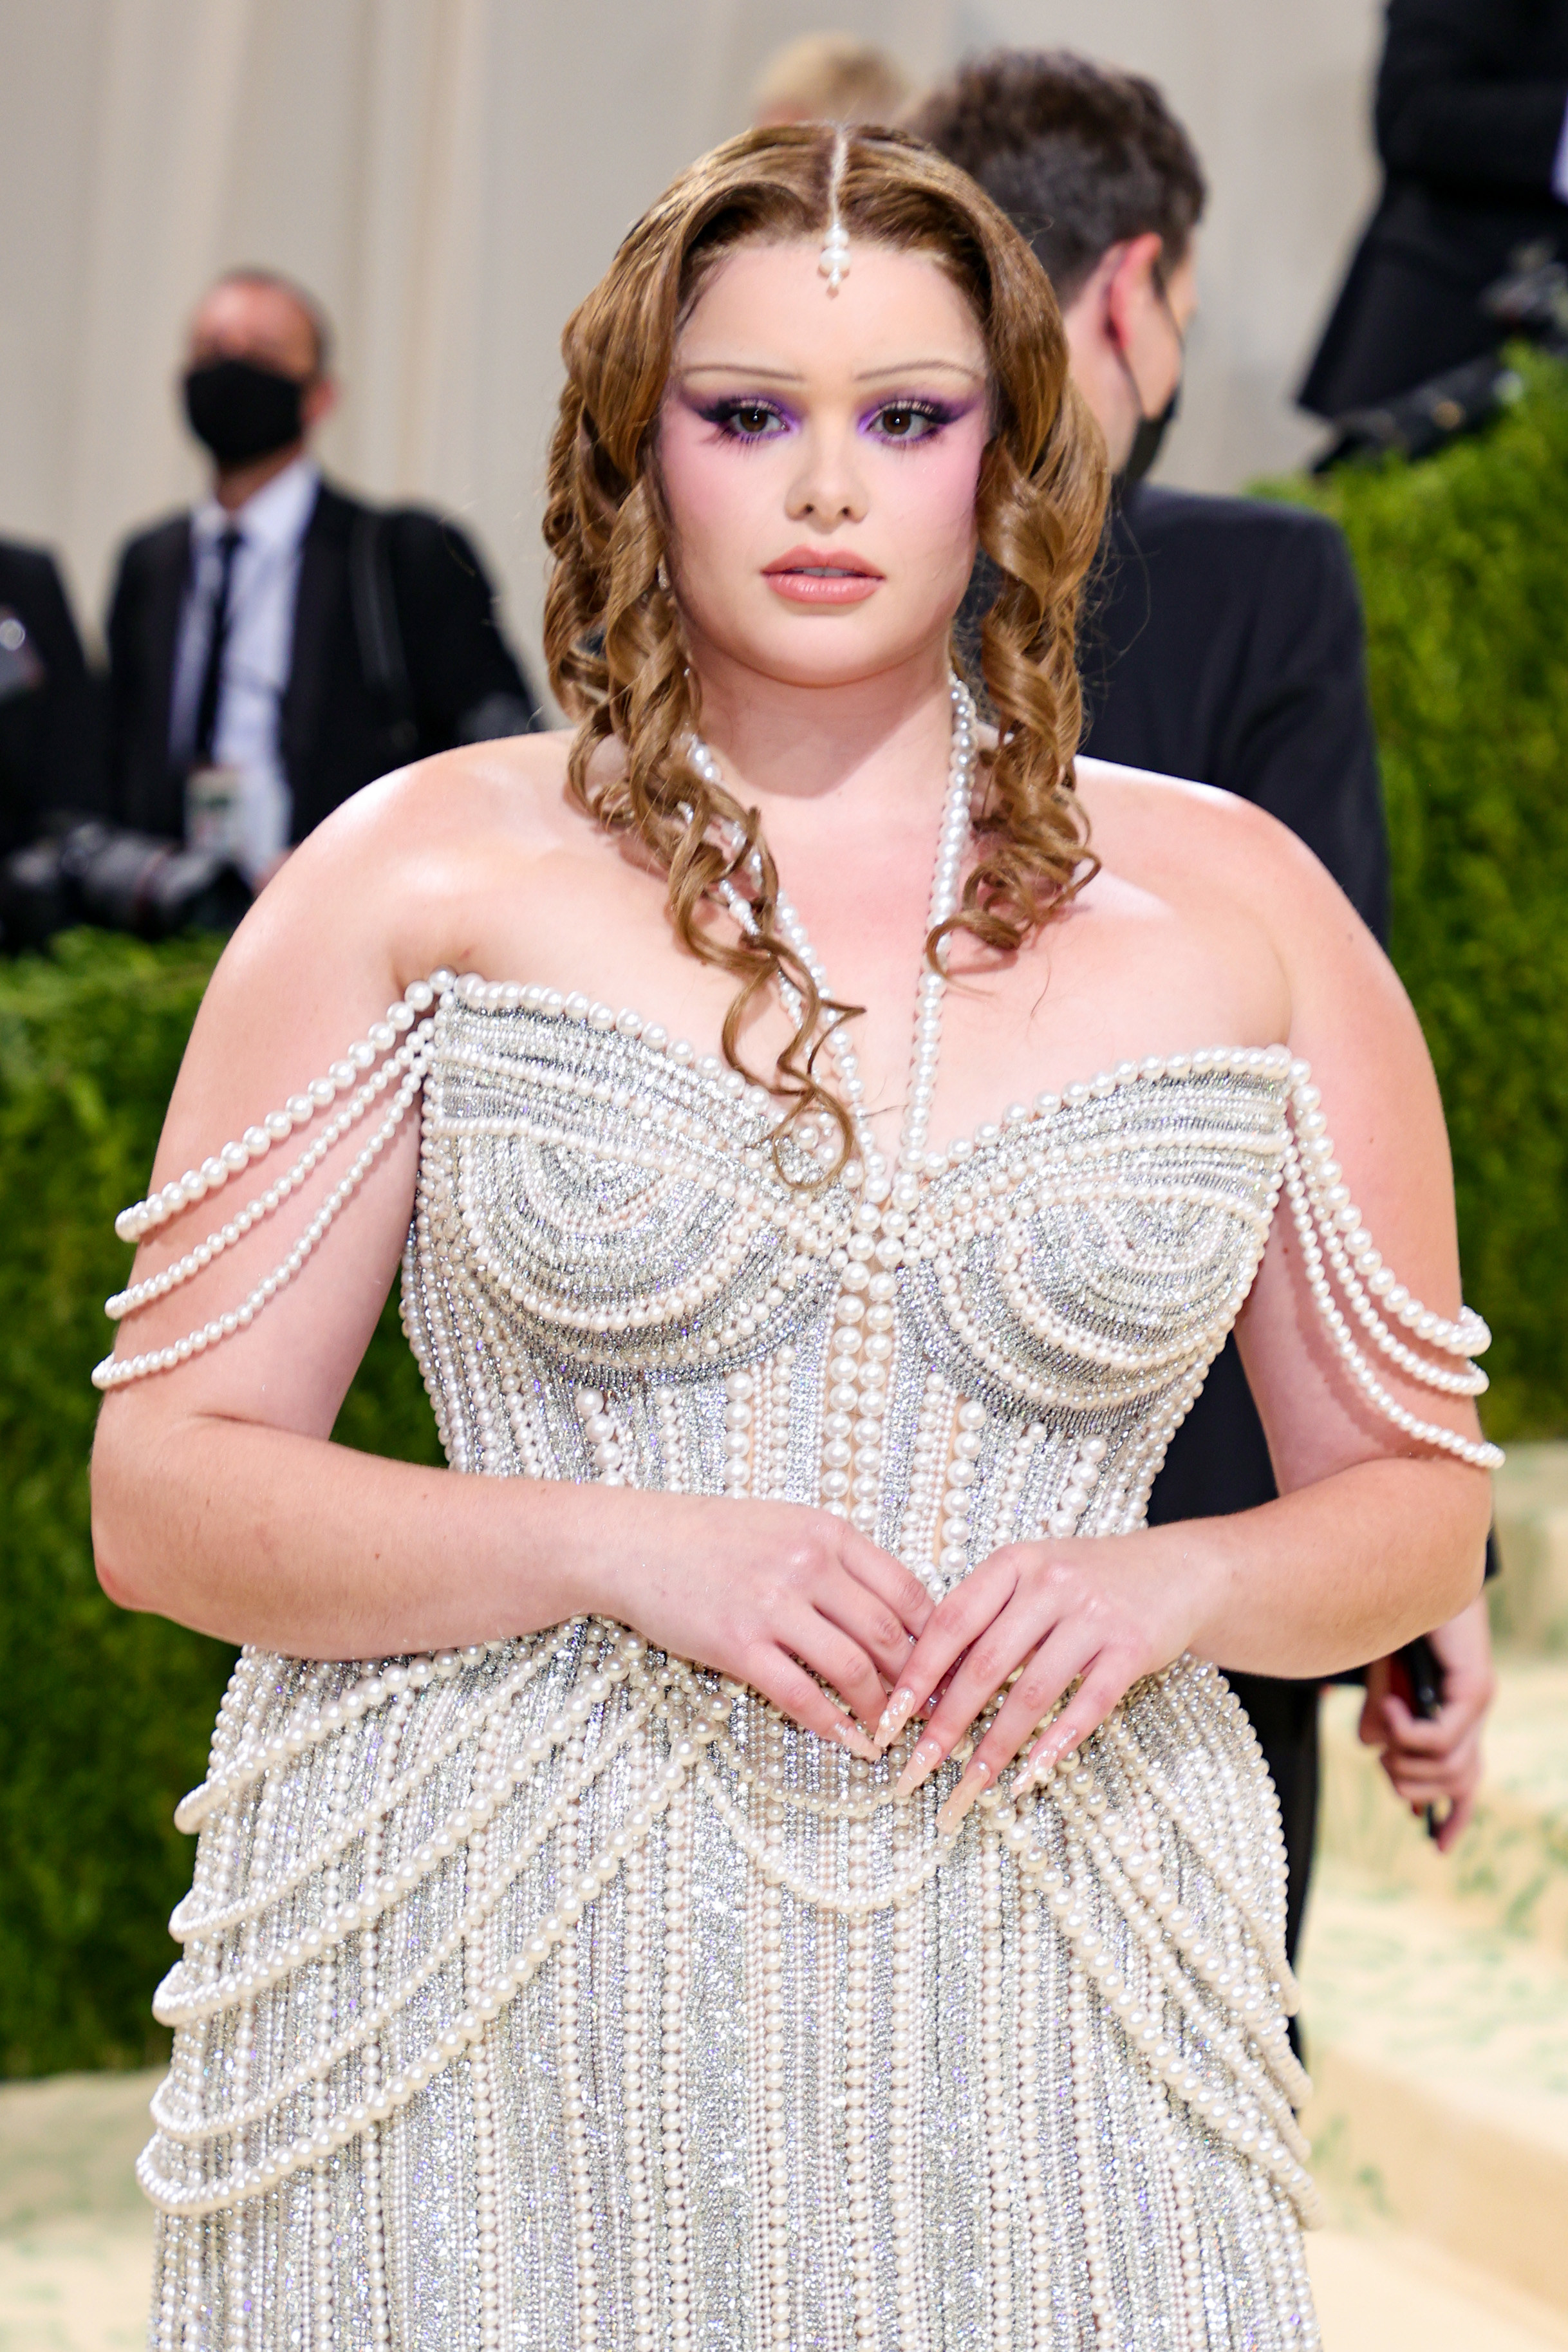 Barbie in a sequined and pearl dress at the Met Gala